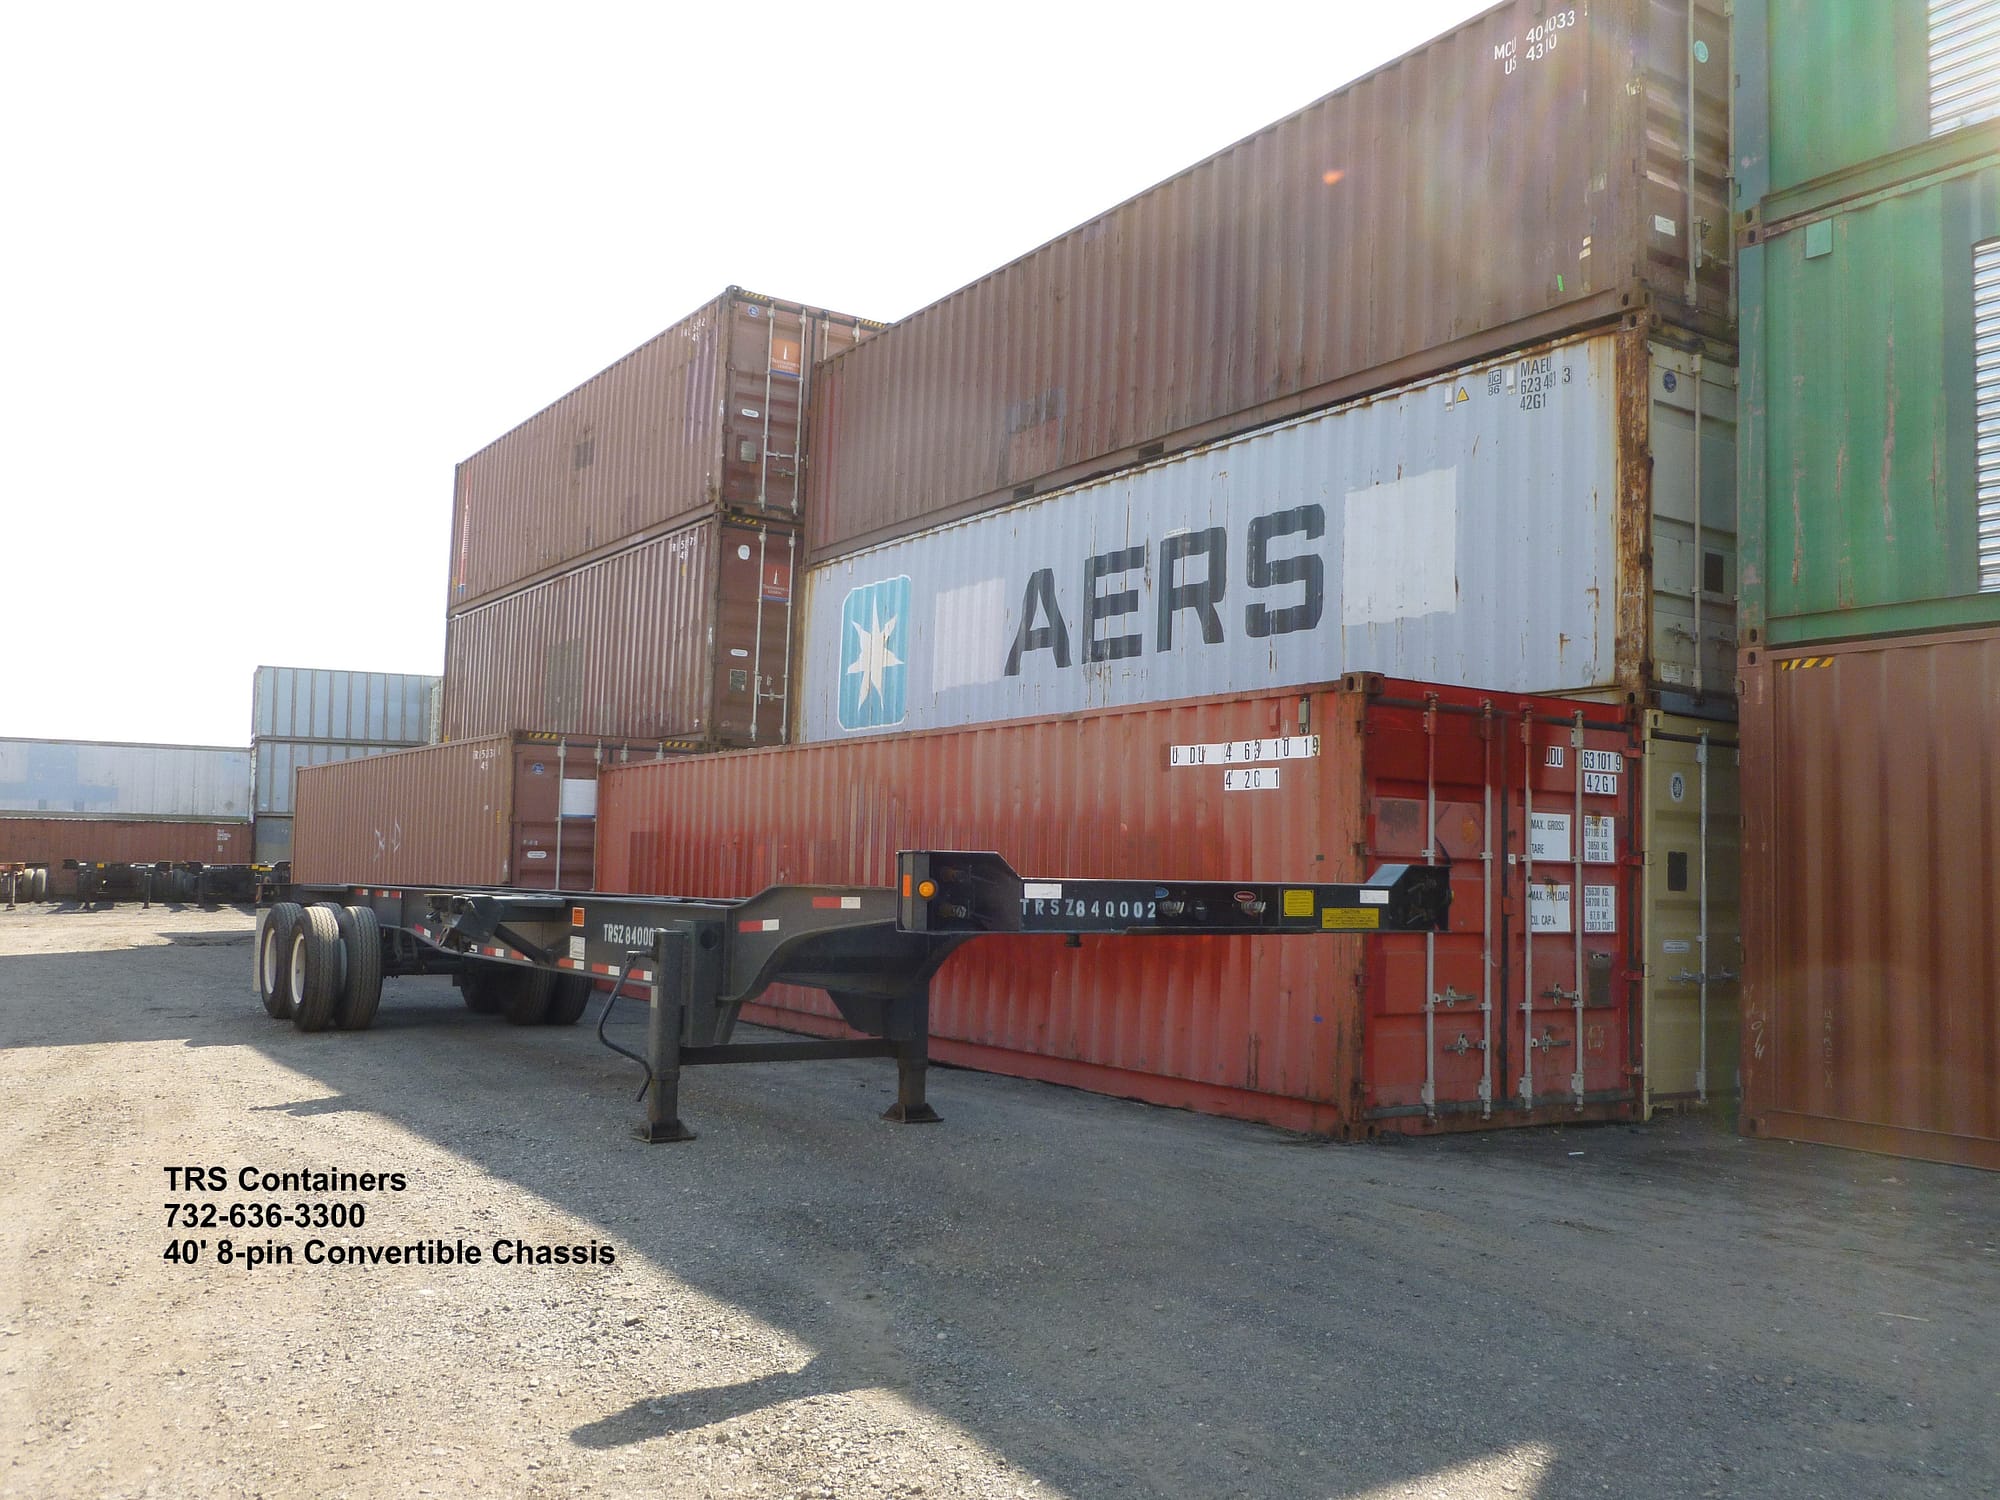 TRS Containers sells rents repairs stores stacks and trucks 40ft long chassis